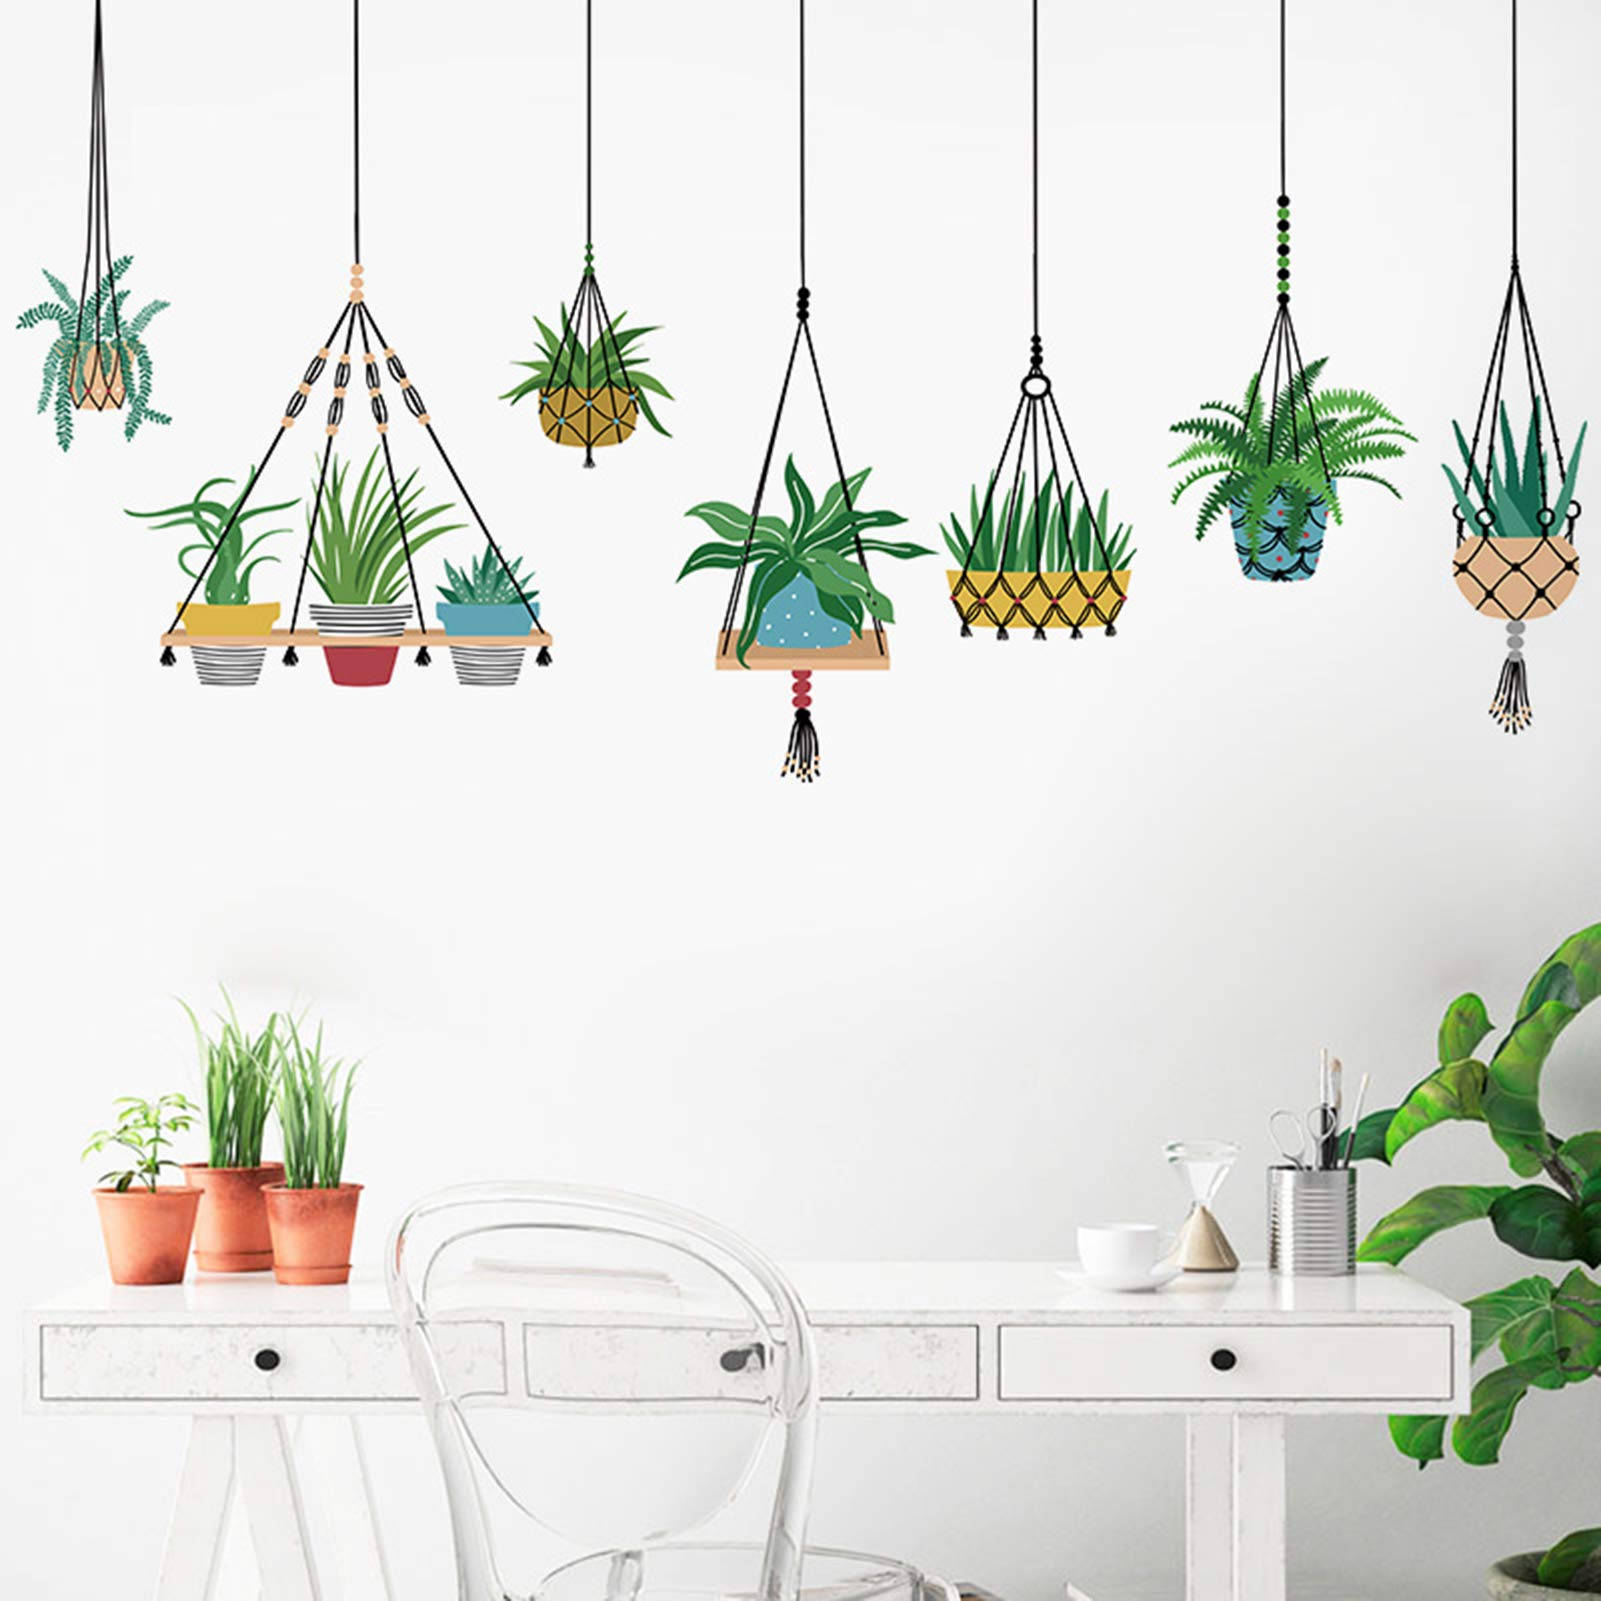 Caption: A Vivid Collection of Indoor Hanging Plants in Stylish Pots Wallpaper